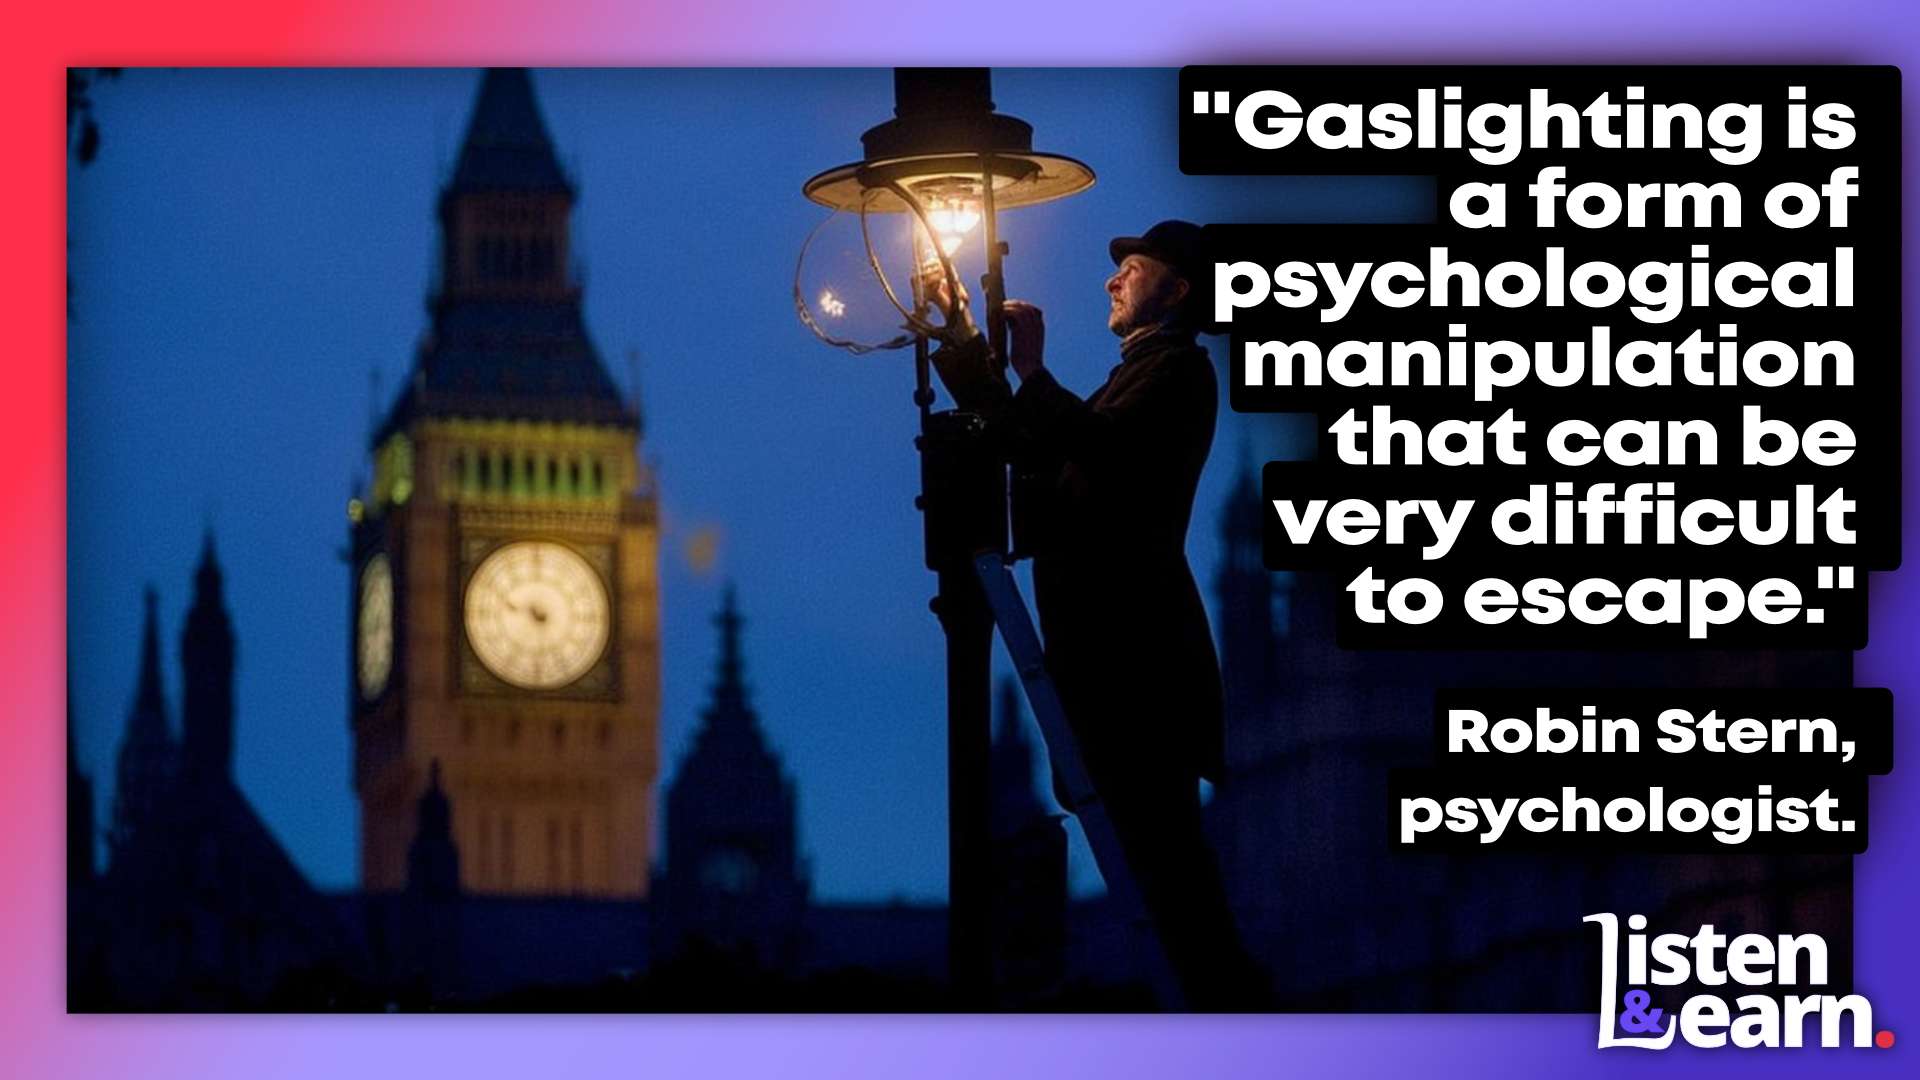 A photo of a man lighting an old fashioned London gas lamp. Our lesson on Gaslighting is here to set your English skills ablaze! Understand its role in relationships and how to react.